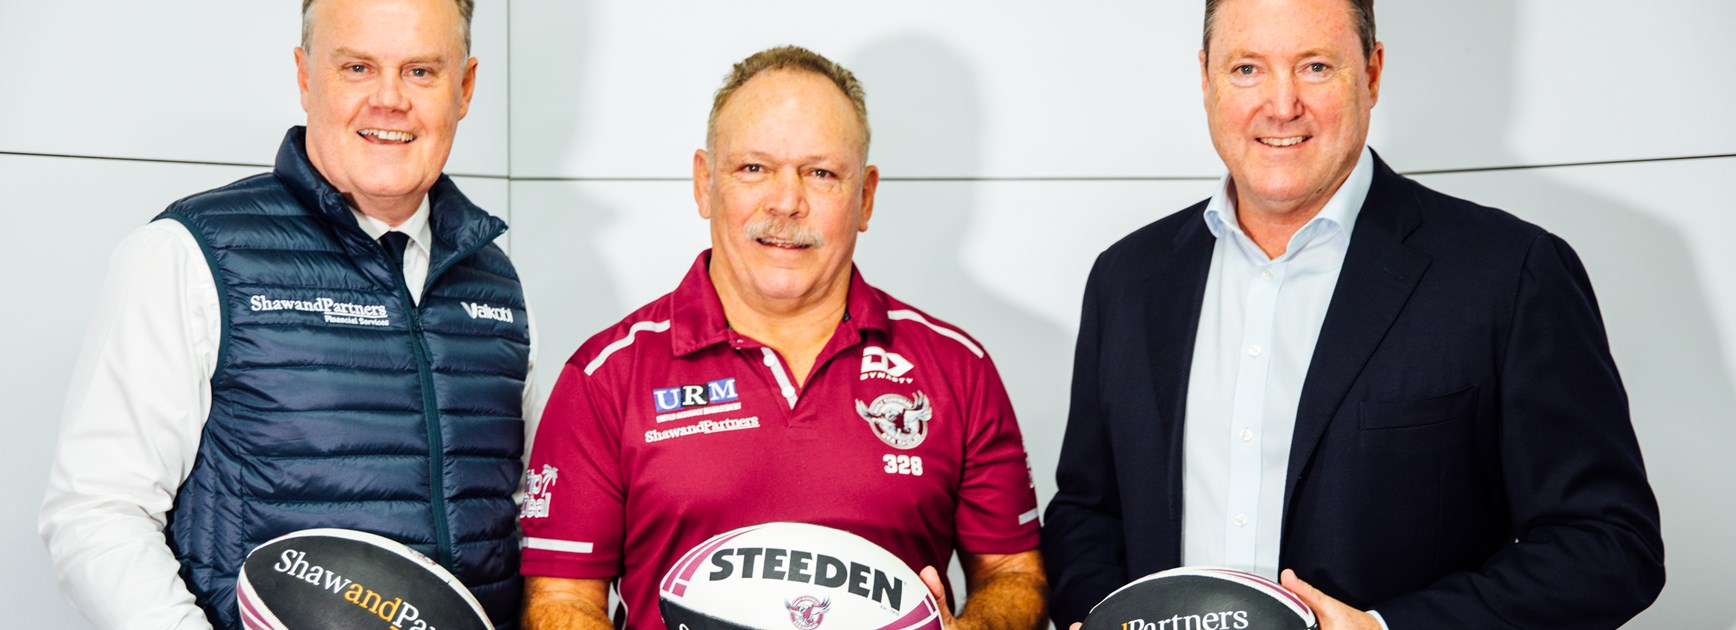 Shaw and Partners extend Sea Eagles partnership